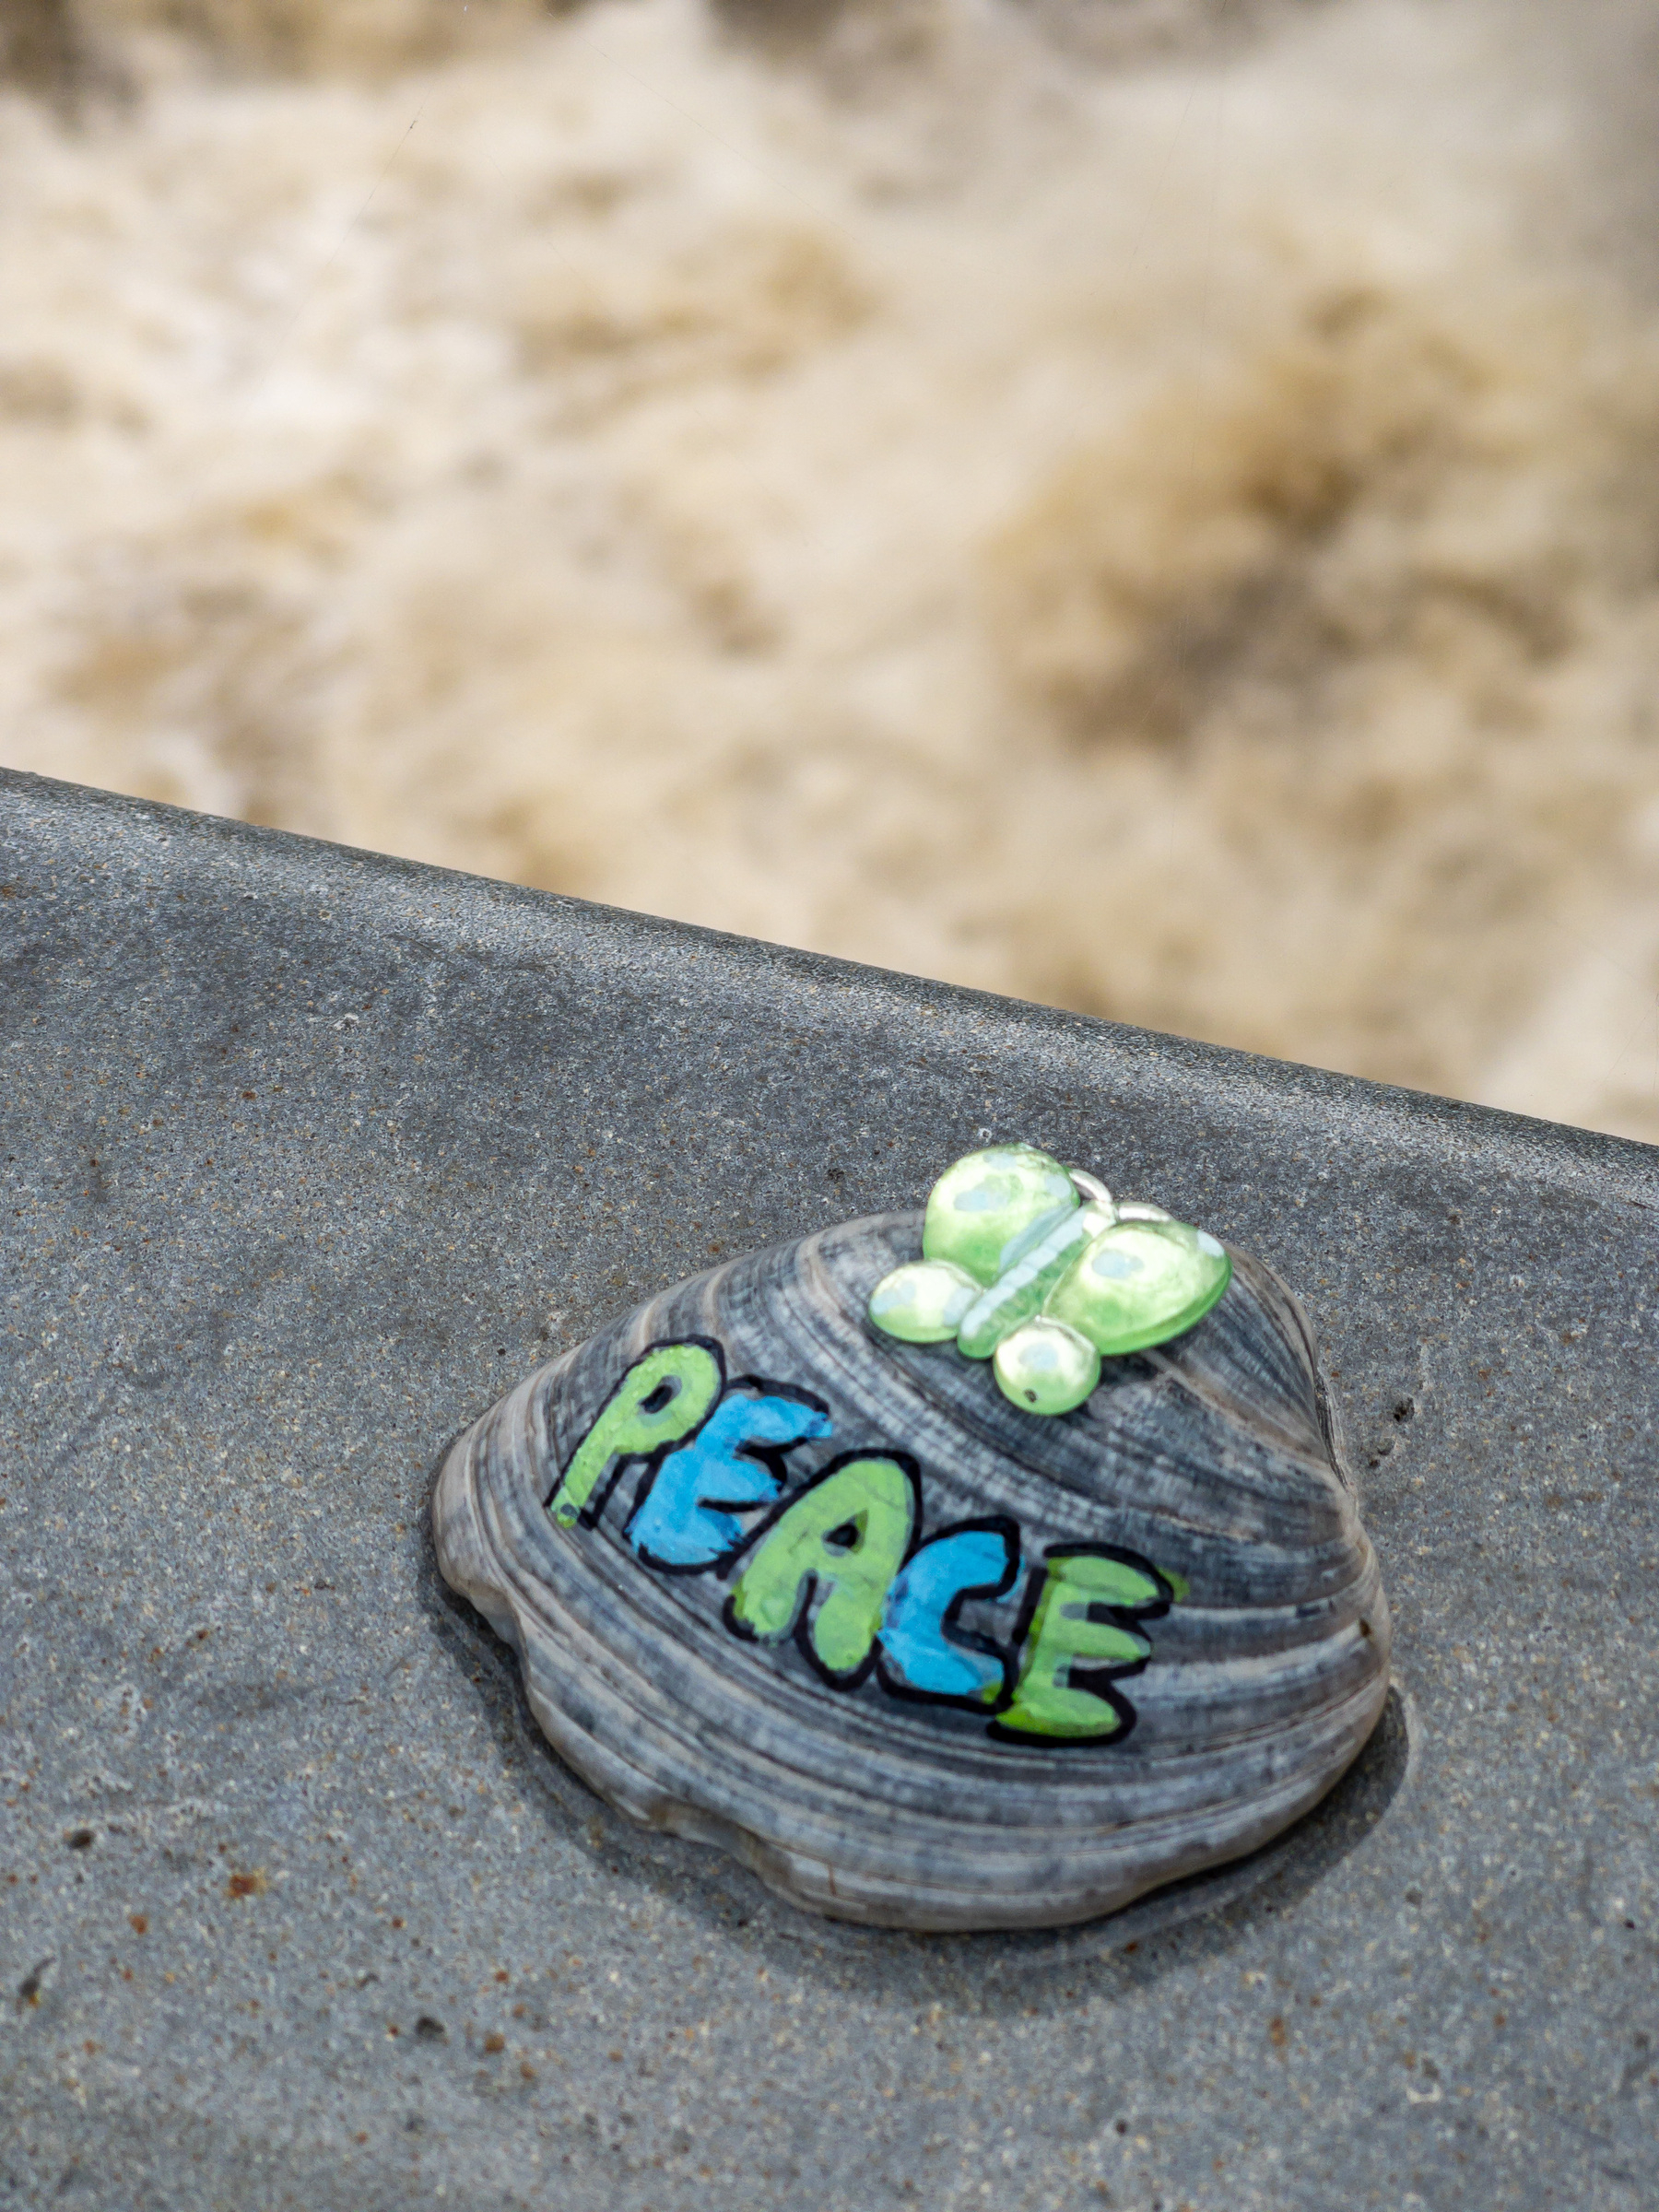 Clam shell with a green plastic butterfly glued on it and the word “PEACE” painted on it in alternating green then blue paint. Clam shell sits on a flattop galvanized steel railing. Churning rapids in the distance.